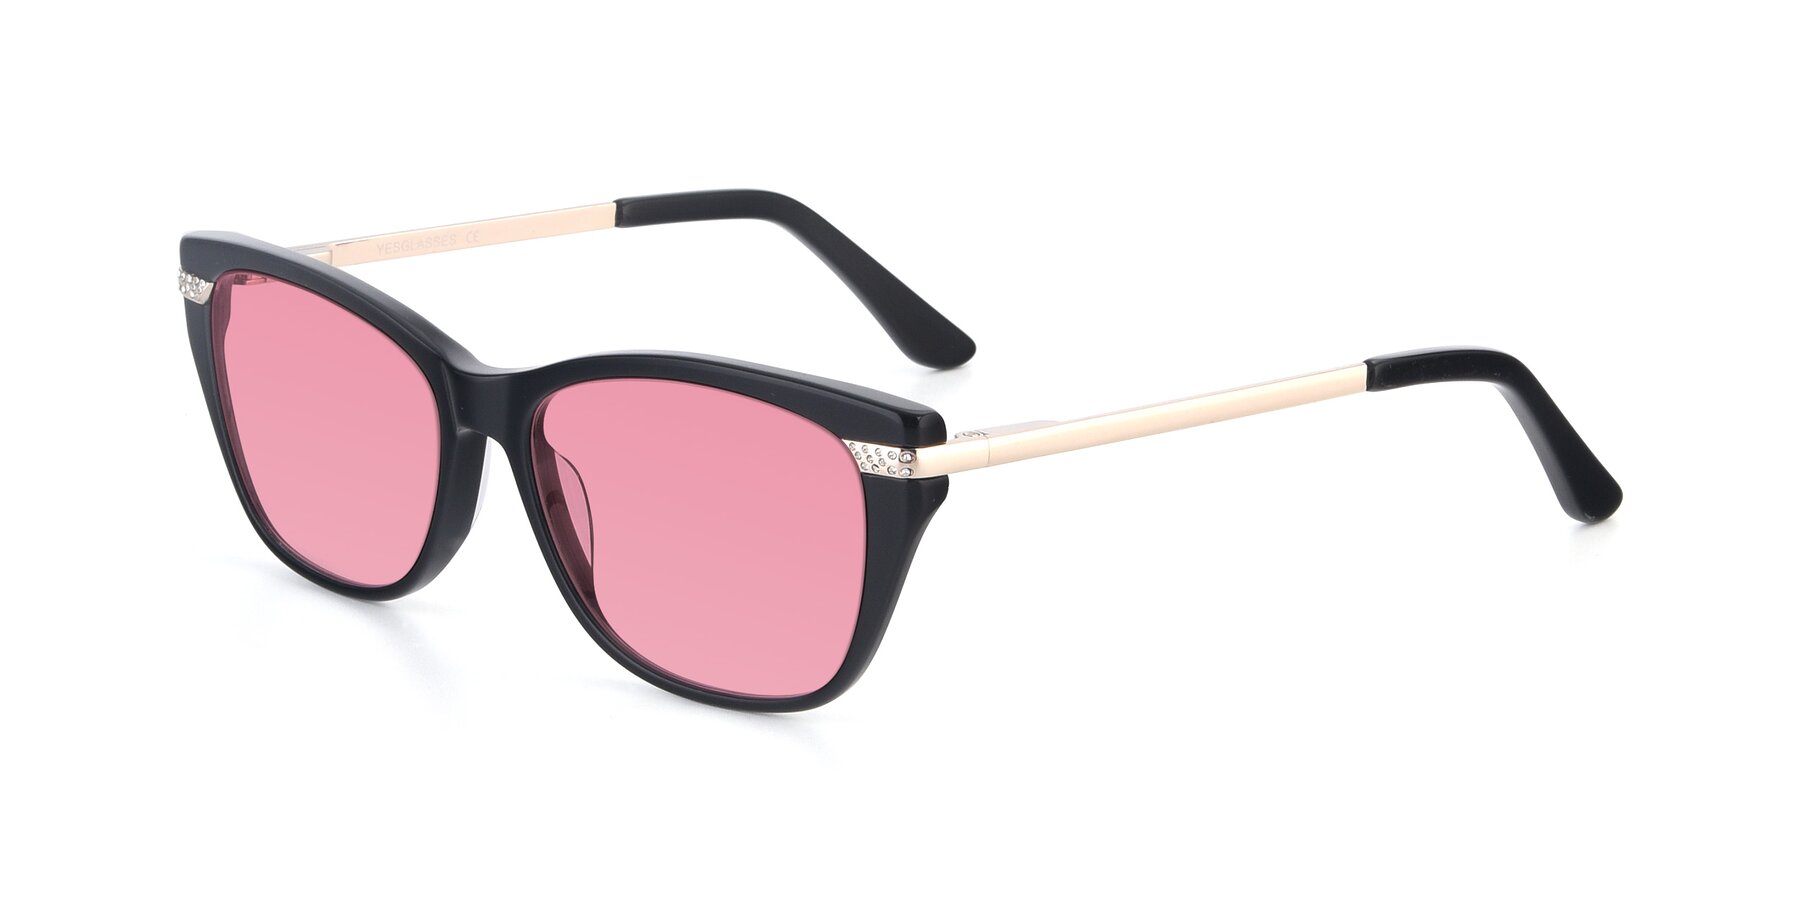 Angle of 17515 in Black with Pink Tinted Lenses